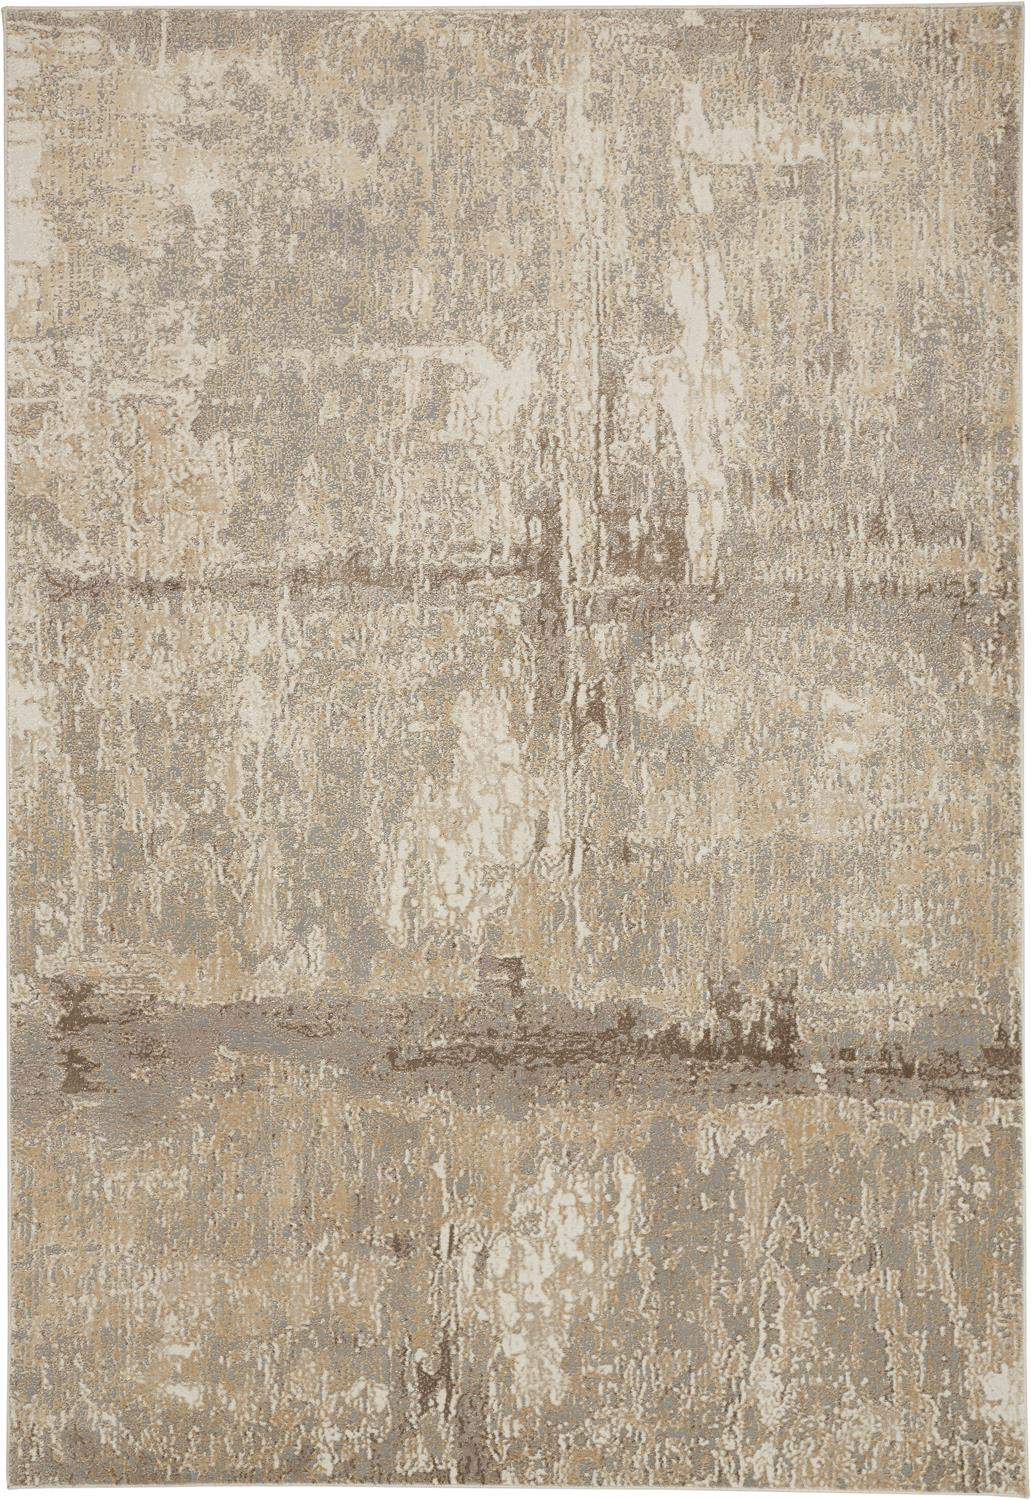 9' X 12' Tan Ivory And Brown Abstract Area Rug-514690-1